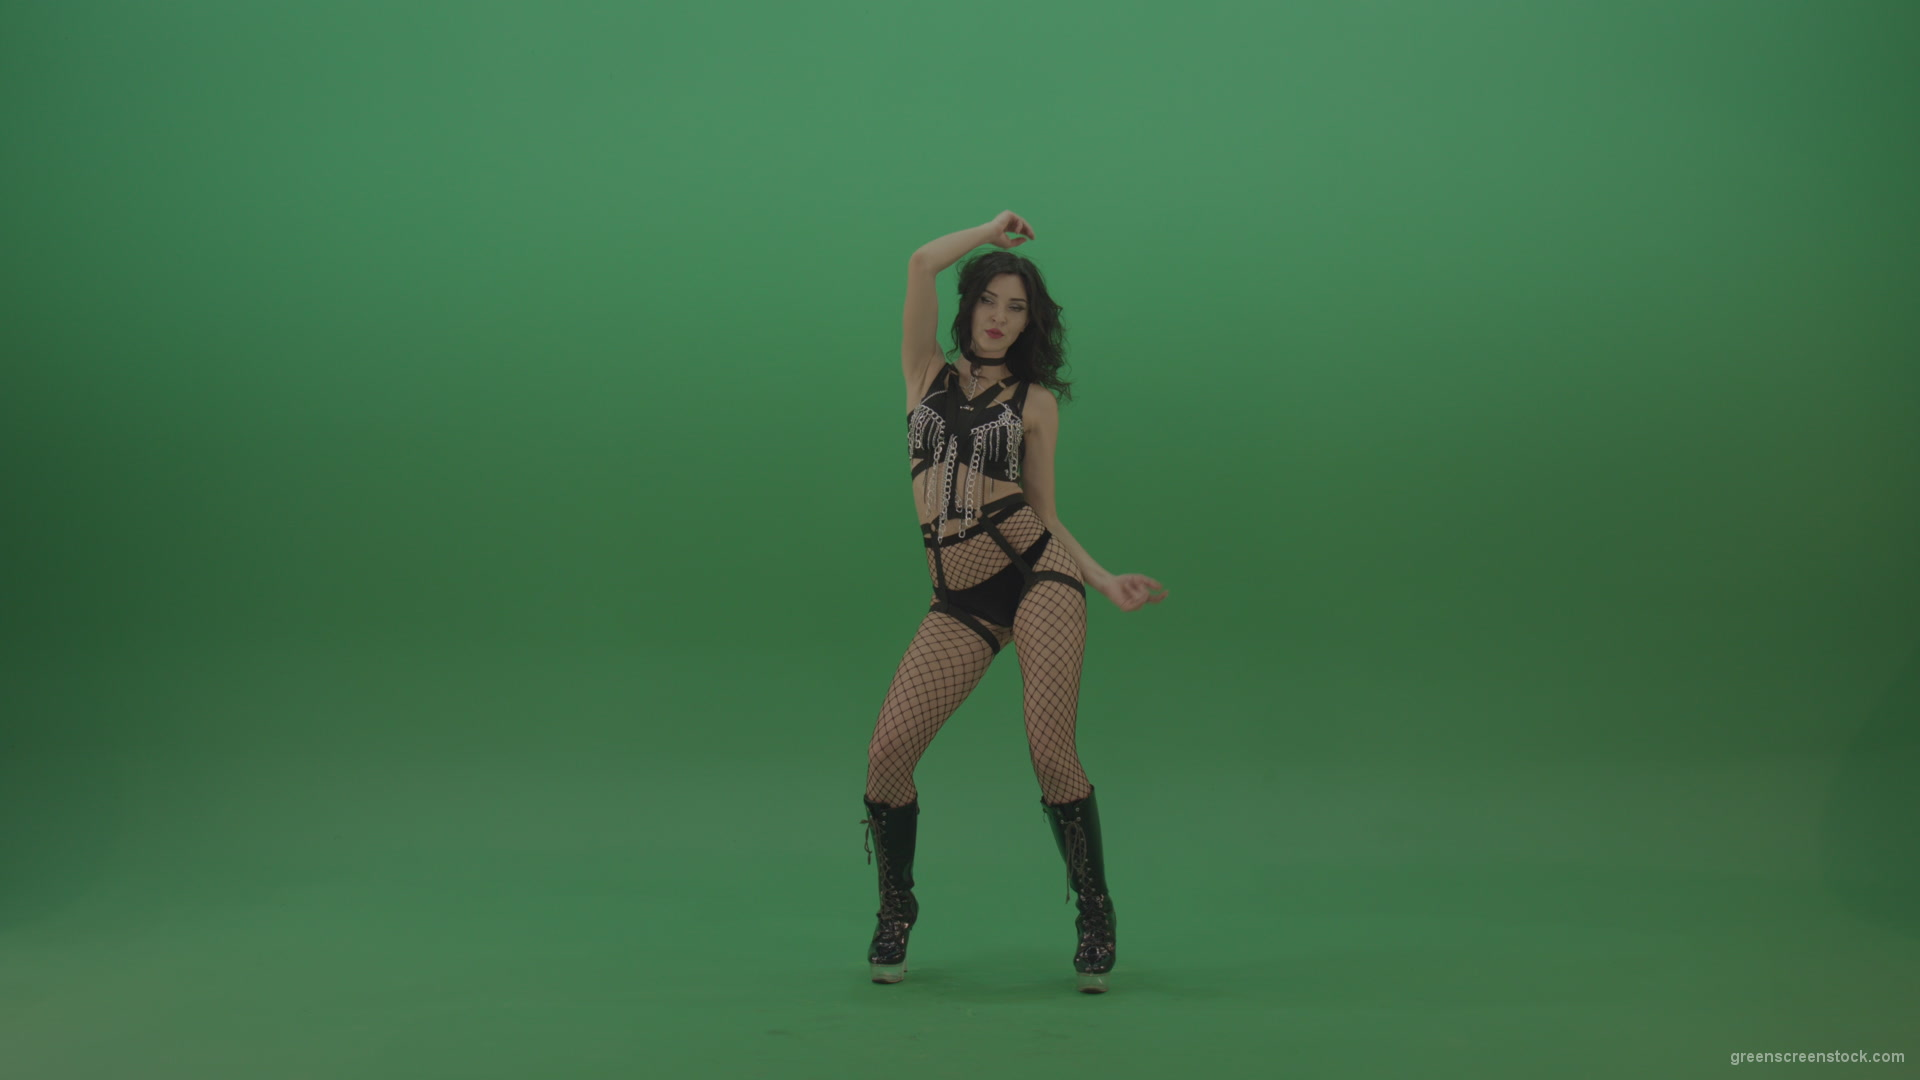 Pretty-black-haired-woman-in-an-erotic-suit-cycles-repetitive-movements-on-green-background._007 Green Screen Stock